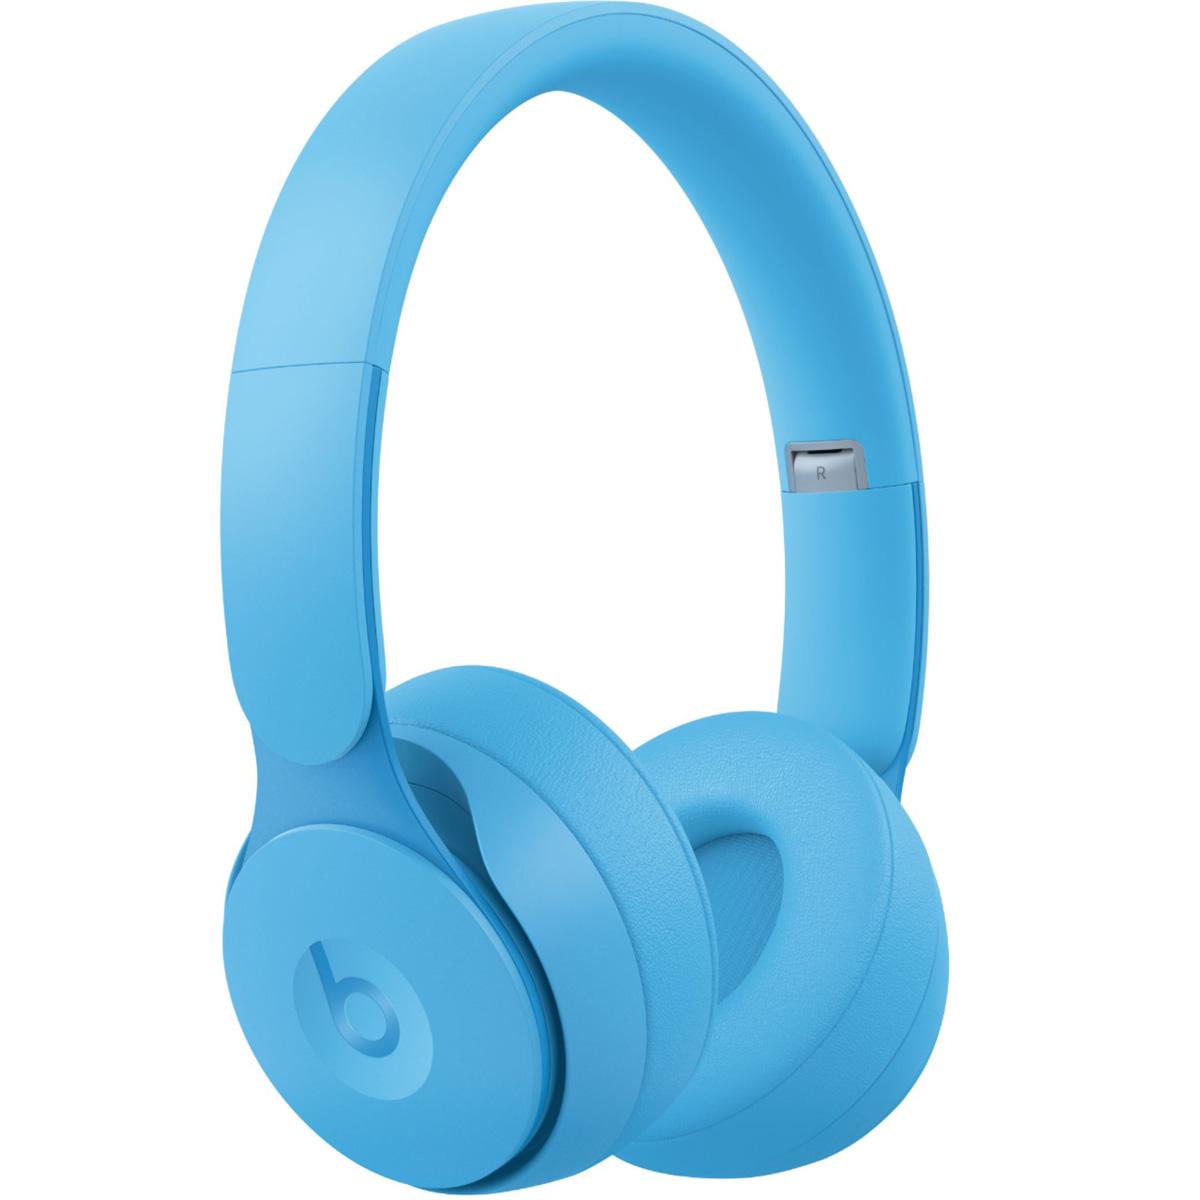 Beats by Dr Dre Solo Pro Wireless Noise Cancelling Headphones for $149.99 Shipped